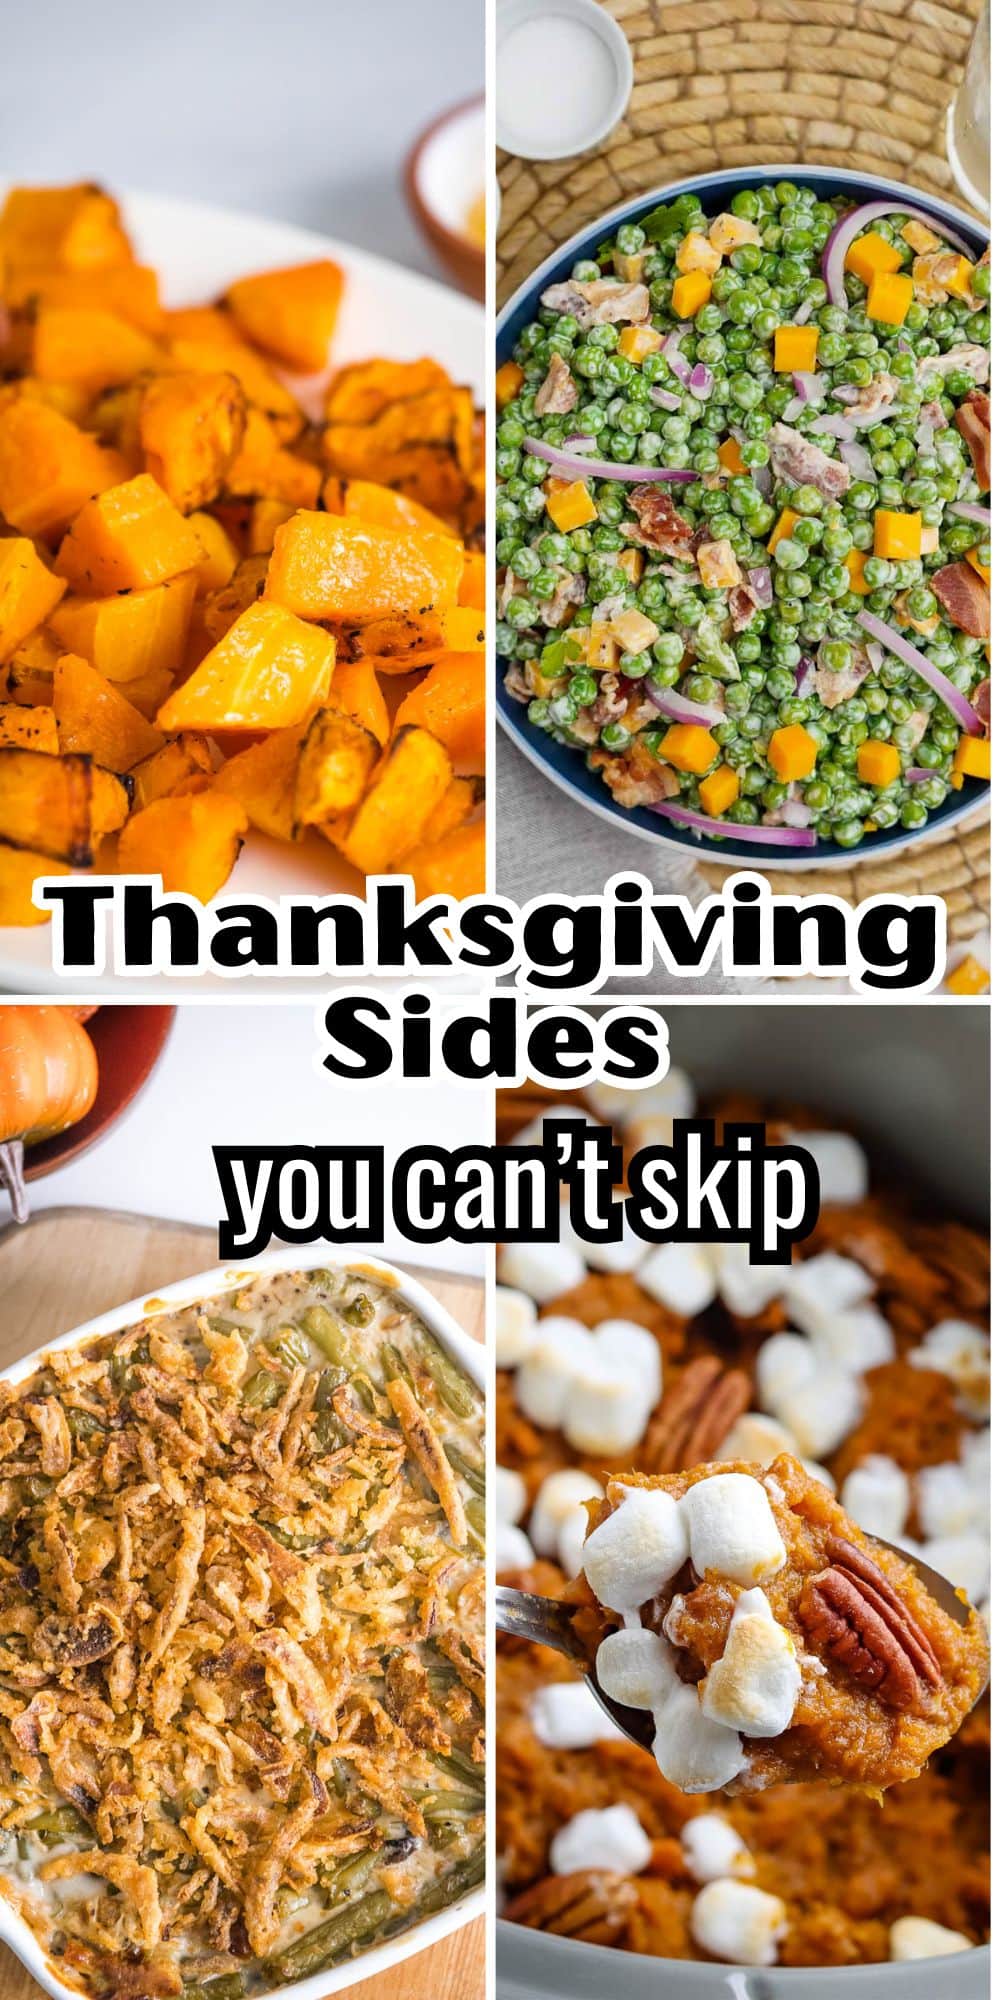 23 Thanksgiving Sides You Can't Skip This Year: Enjoy the Best of the ...